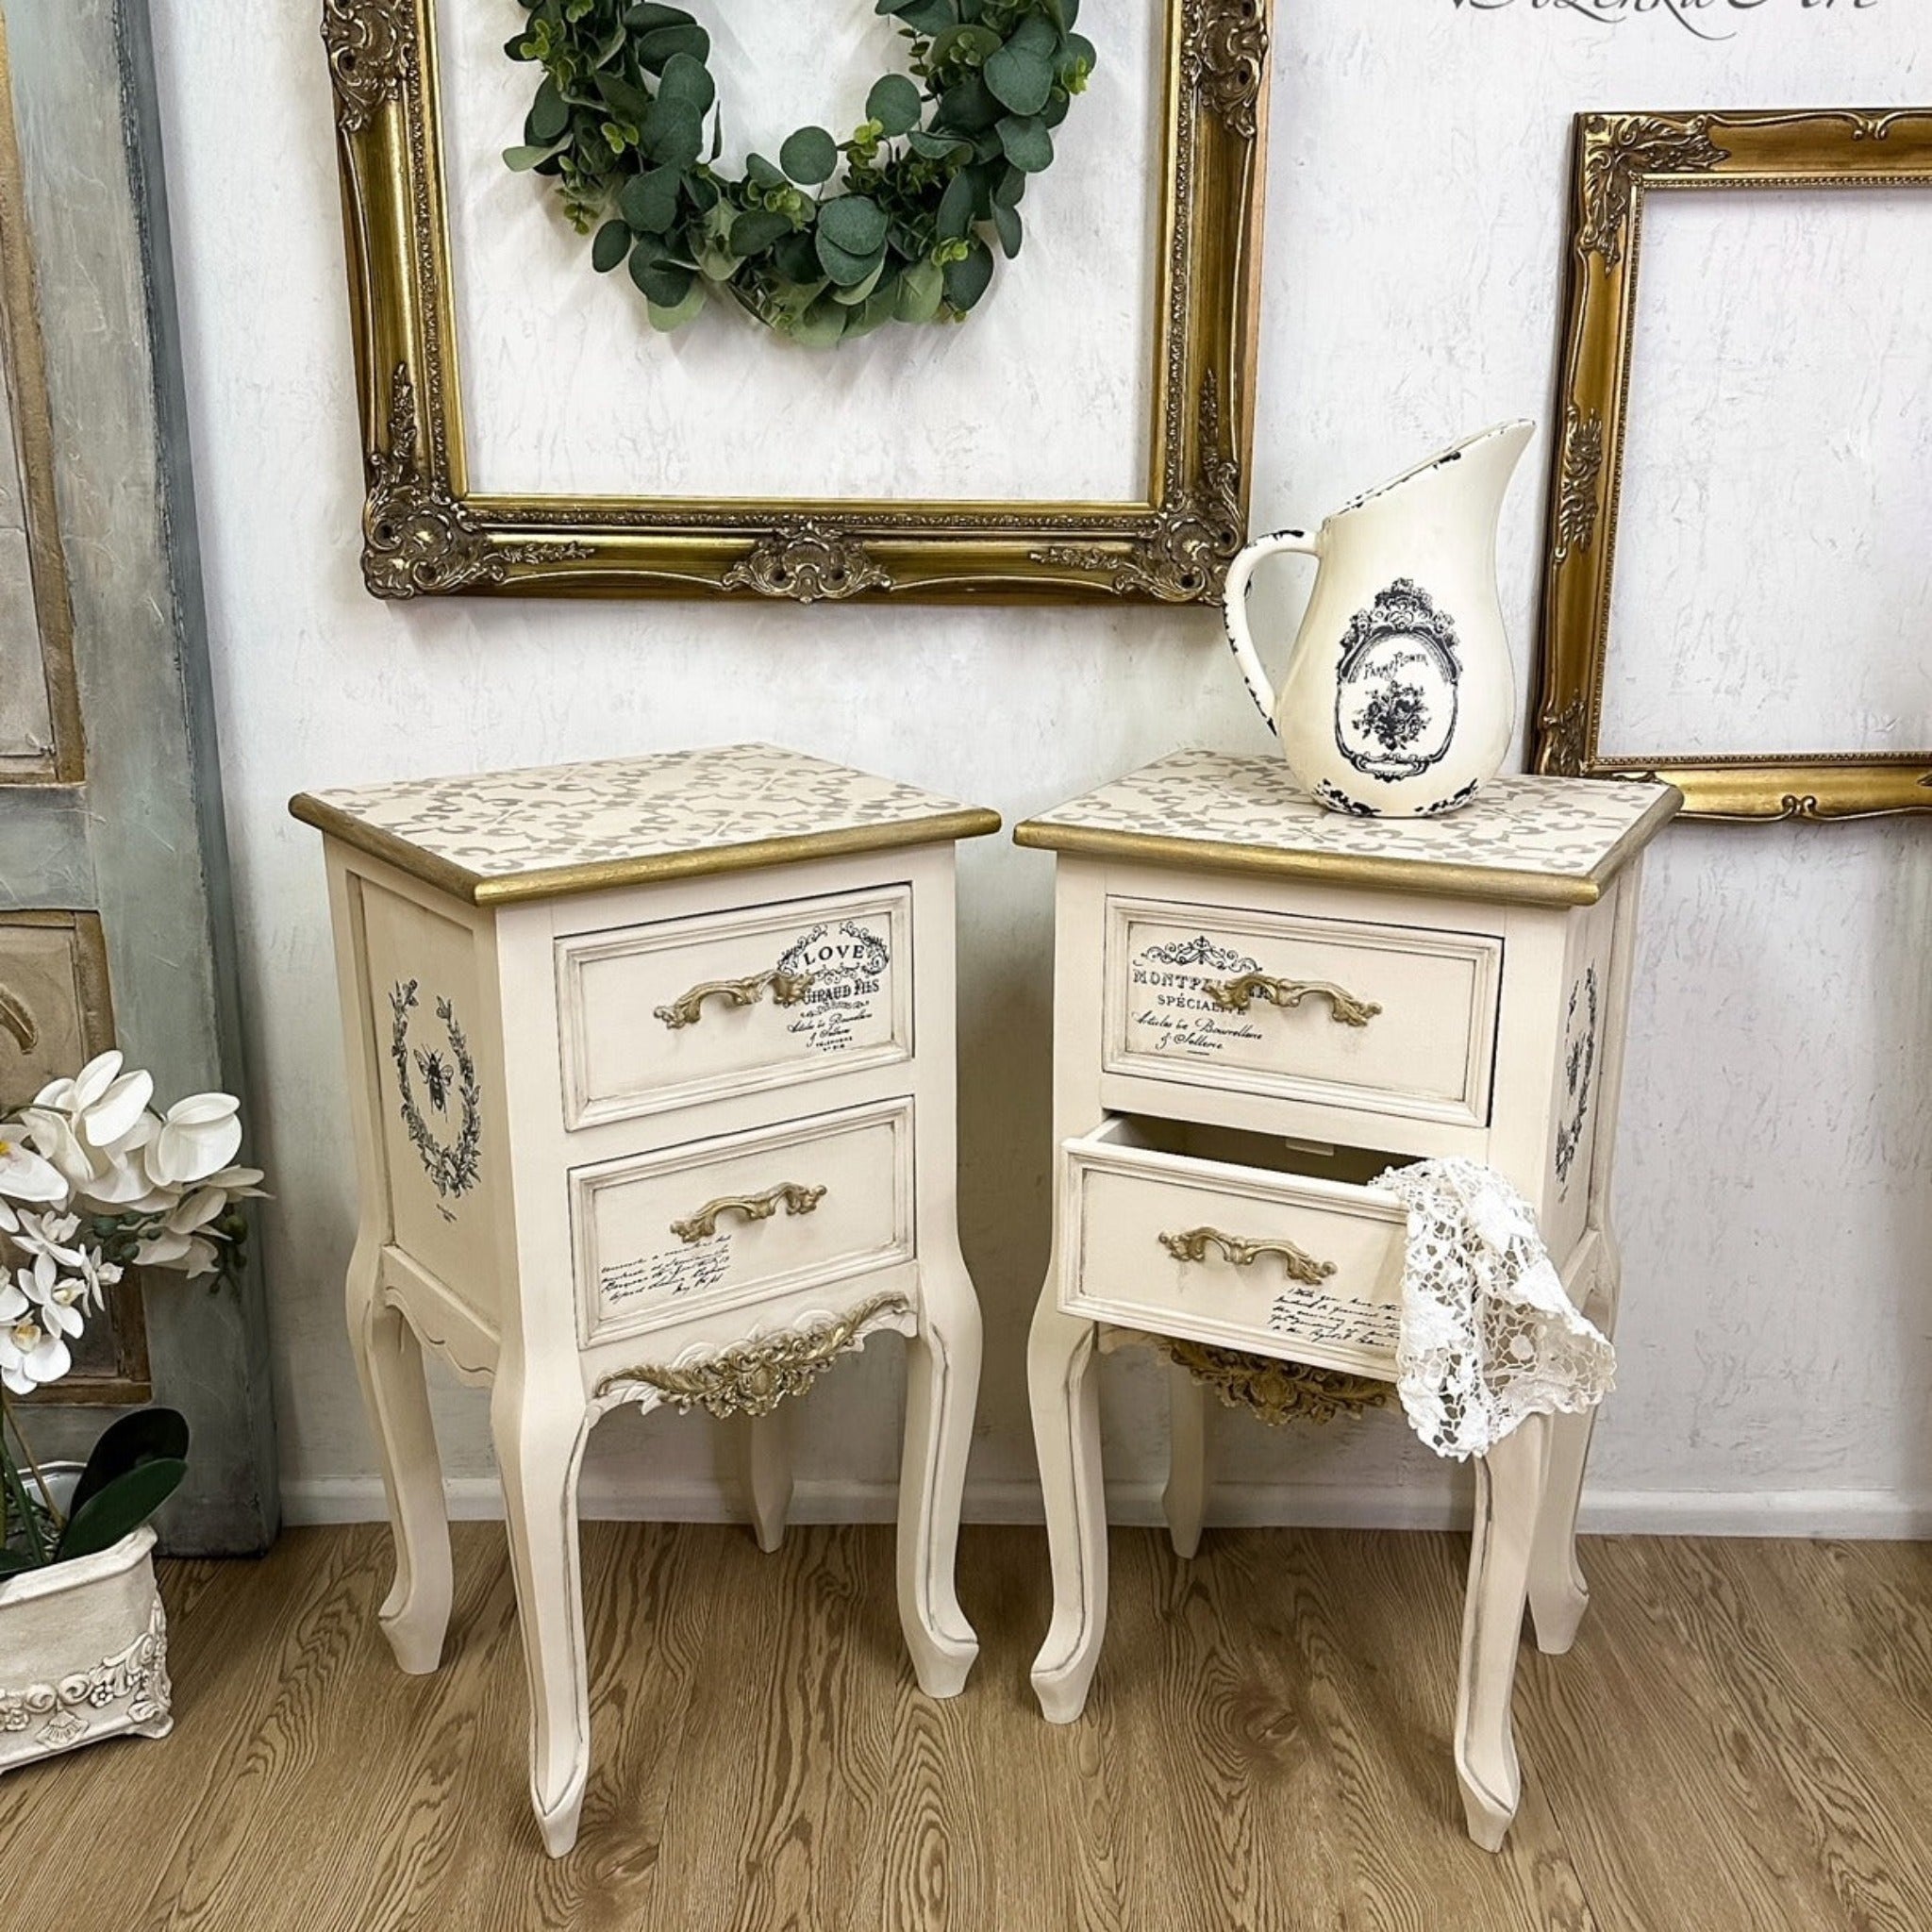 Two vintage nightstands and an antique water pitcher are painted antique white and feature ReDesign with Prima's French Labels small transfer on them.